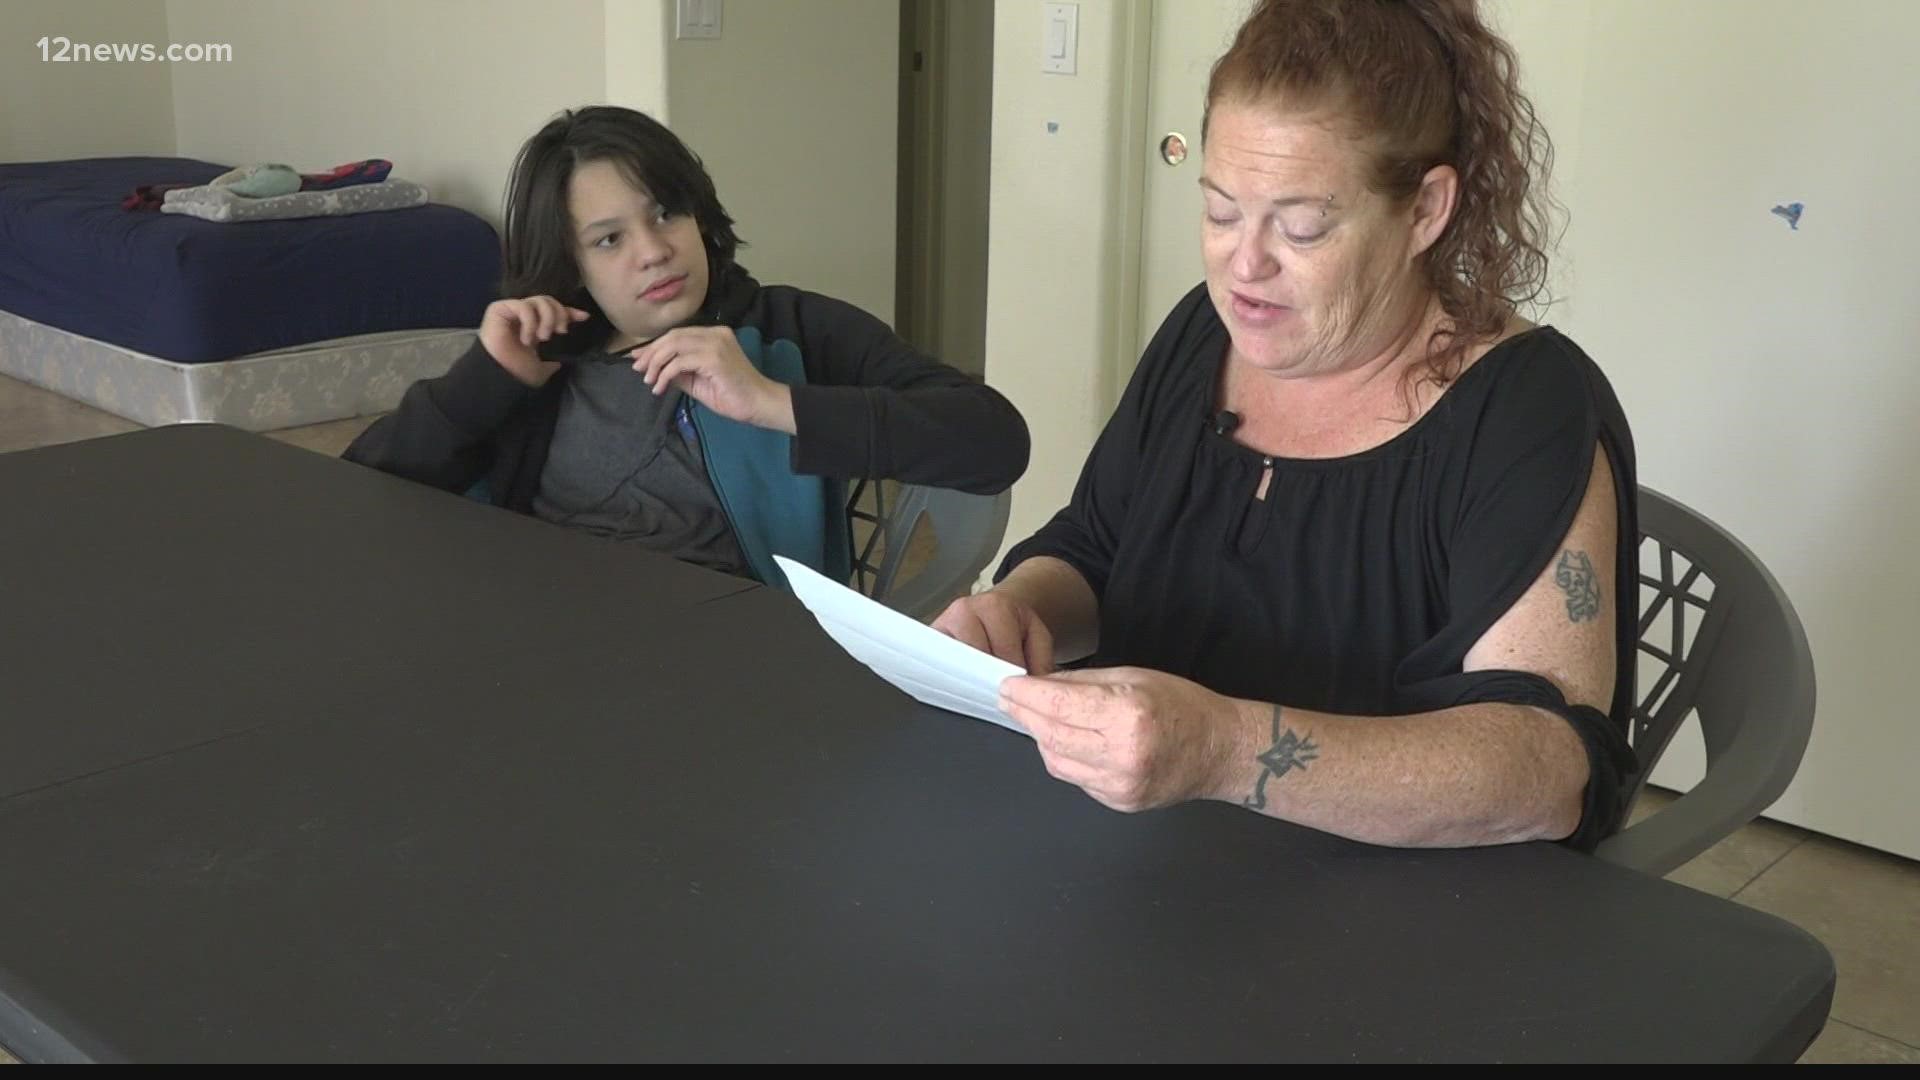 A Litchfield Park mom says her son was physically assaulted by his teacher. She says it happened in April of 2021 to her son who is on the Autism spectrum.